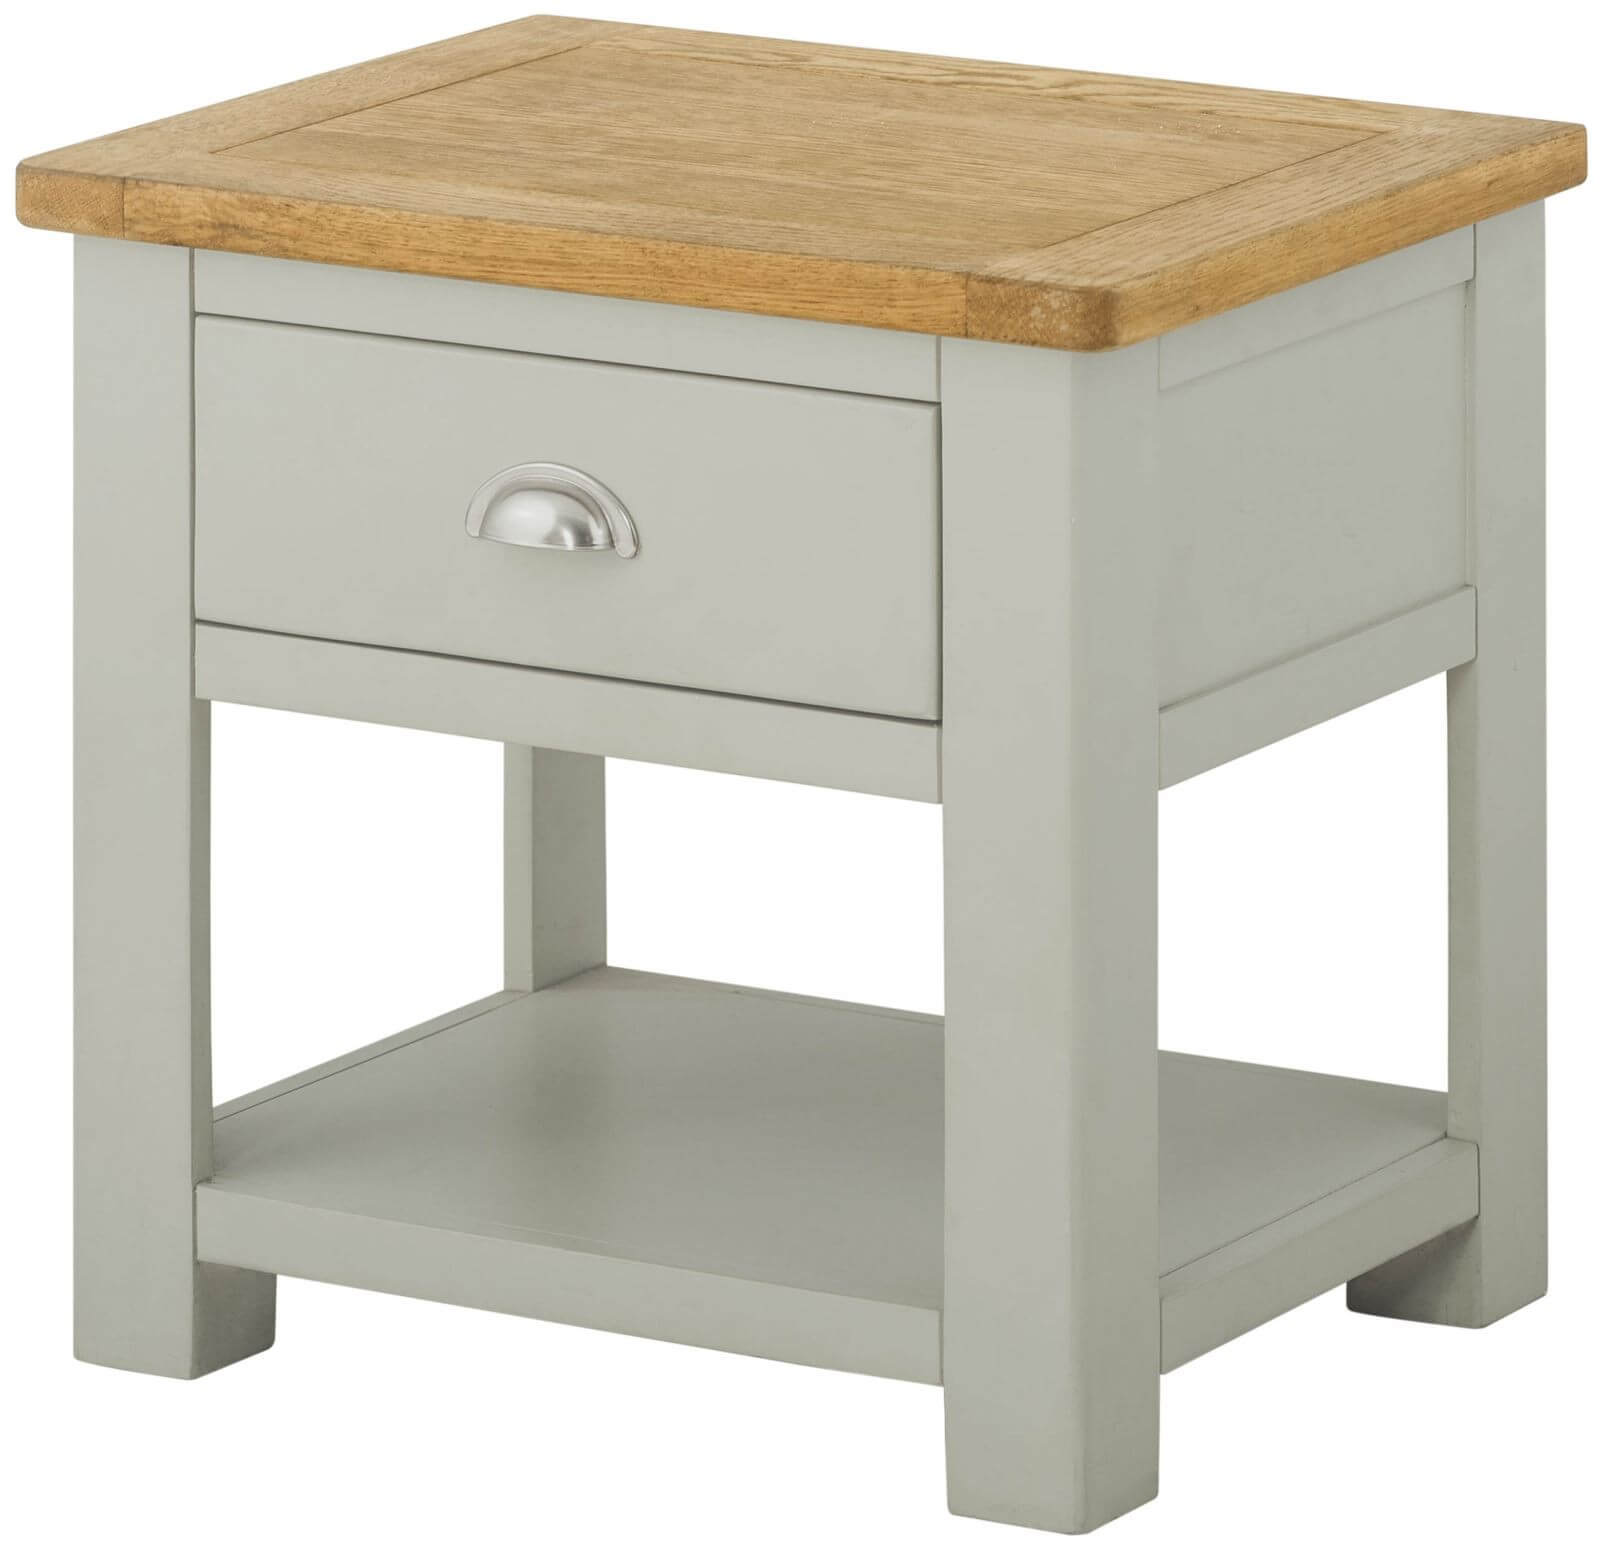 Showing image for Seattle lamp table with drawer - stone